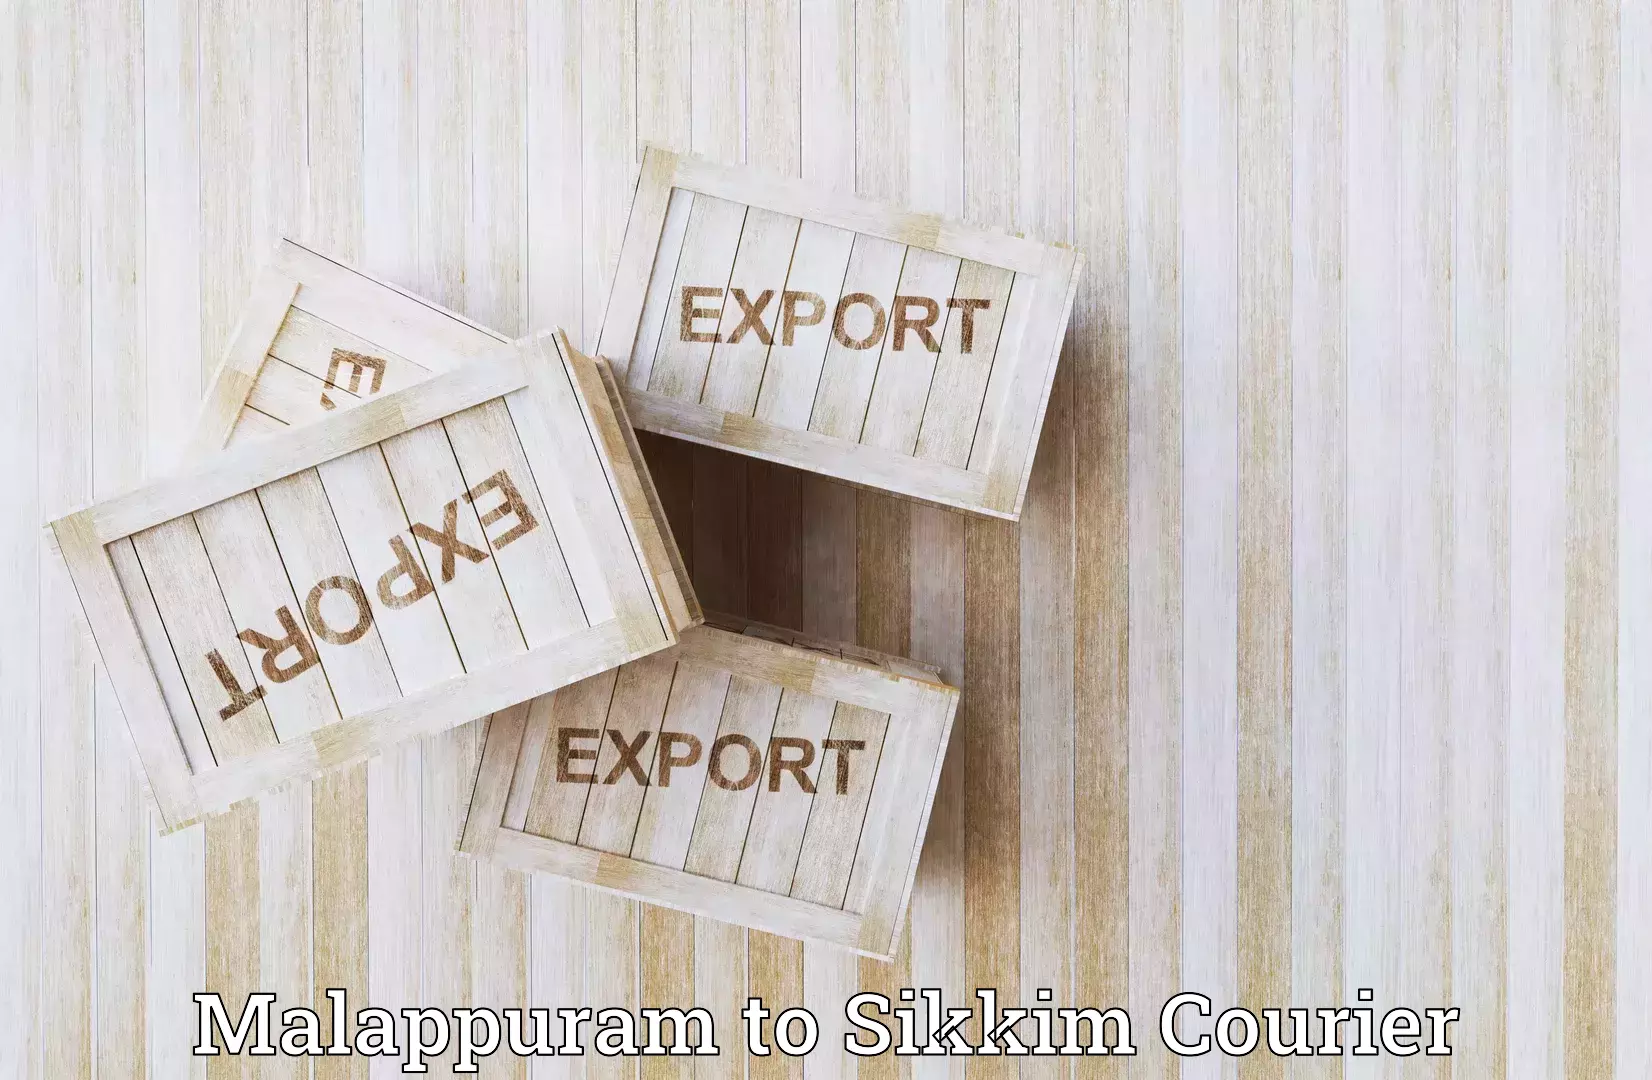 Next-day delivery options Malappuram to Sikkim